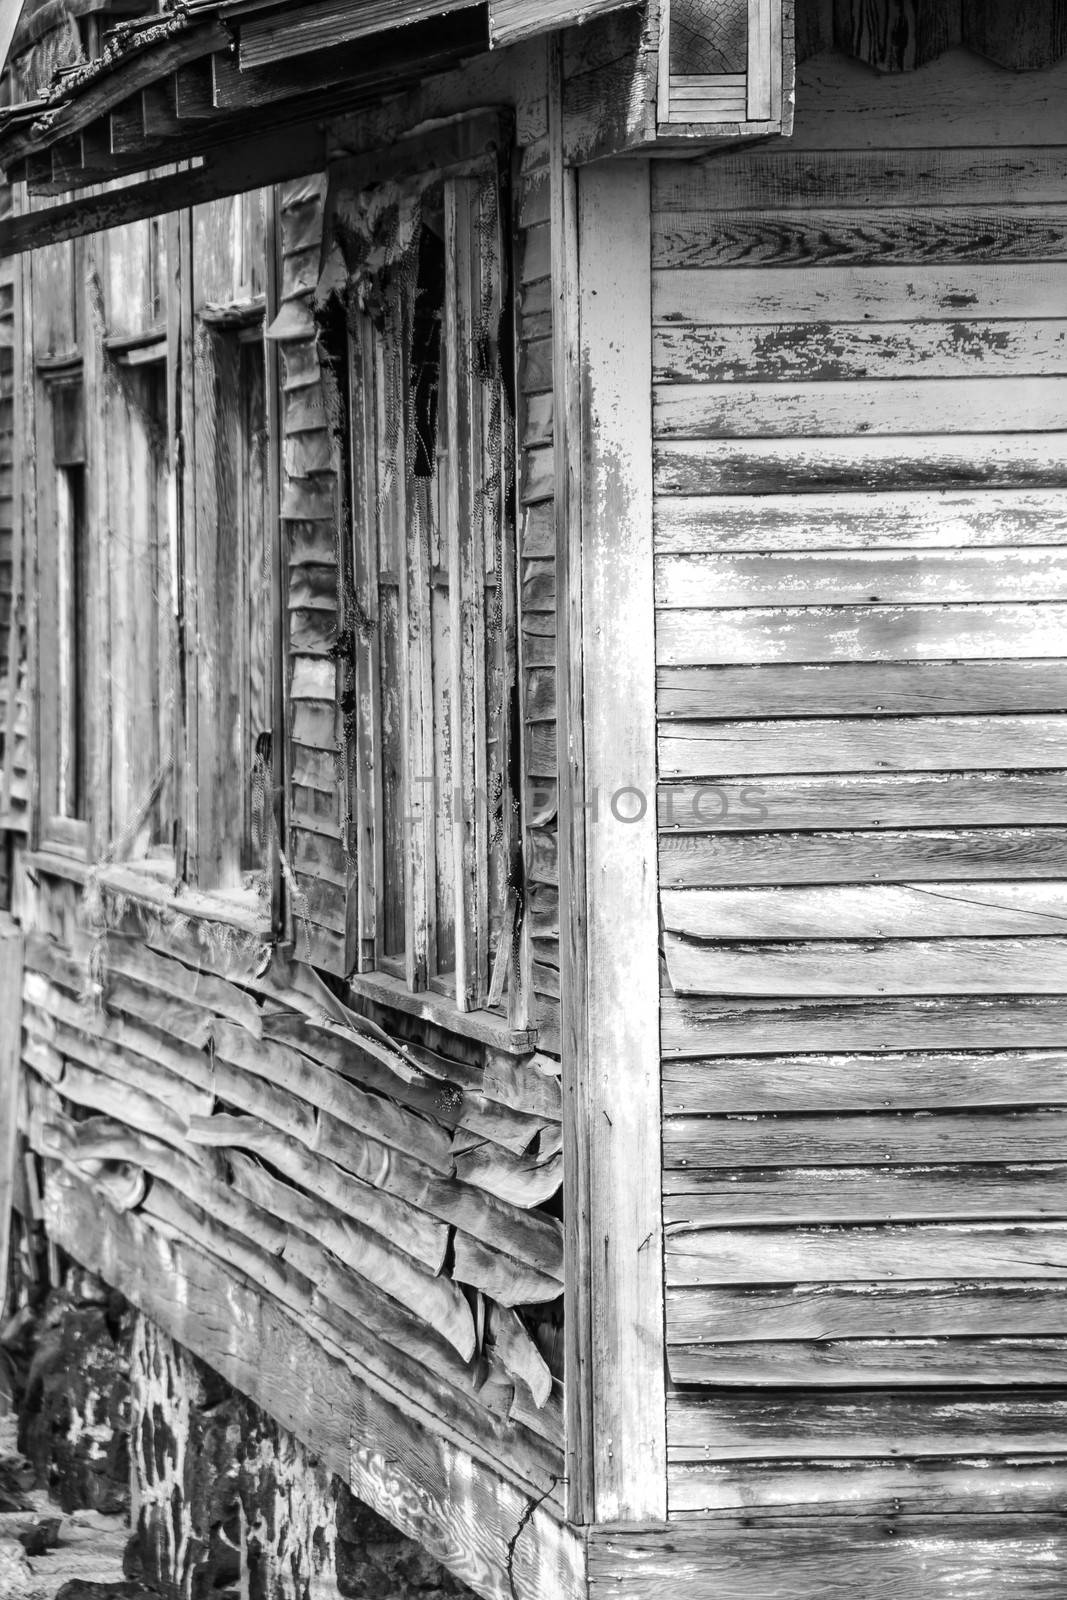 Weathered Schoolhouse in the Panhandle region of Idaho in black and white